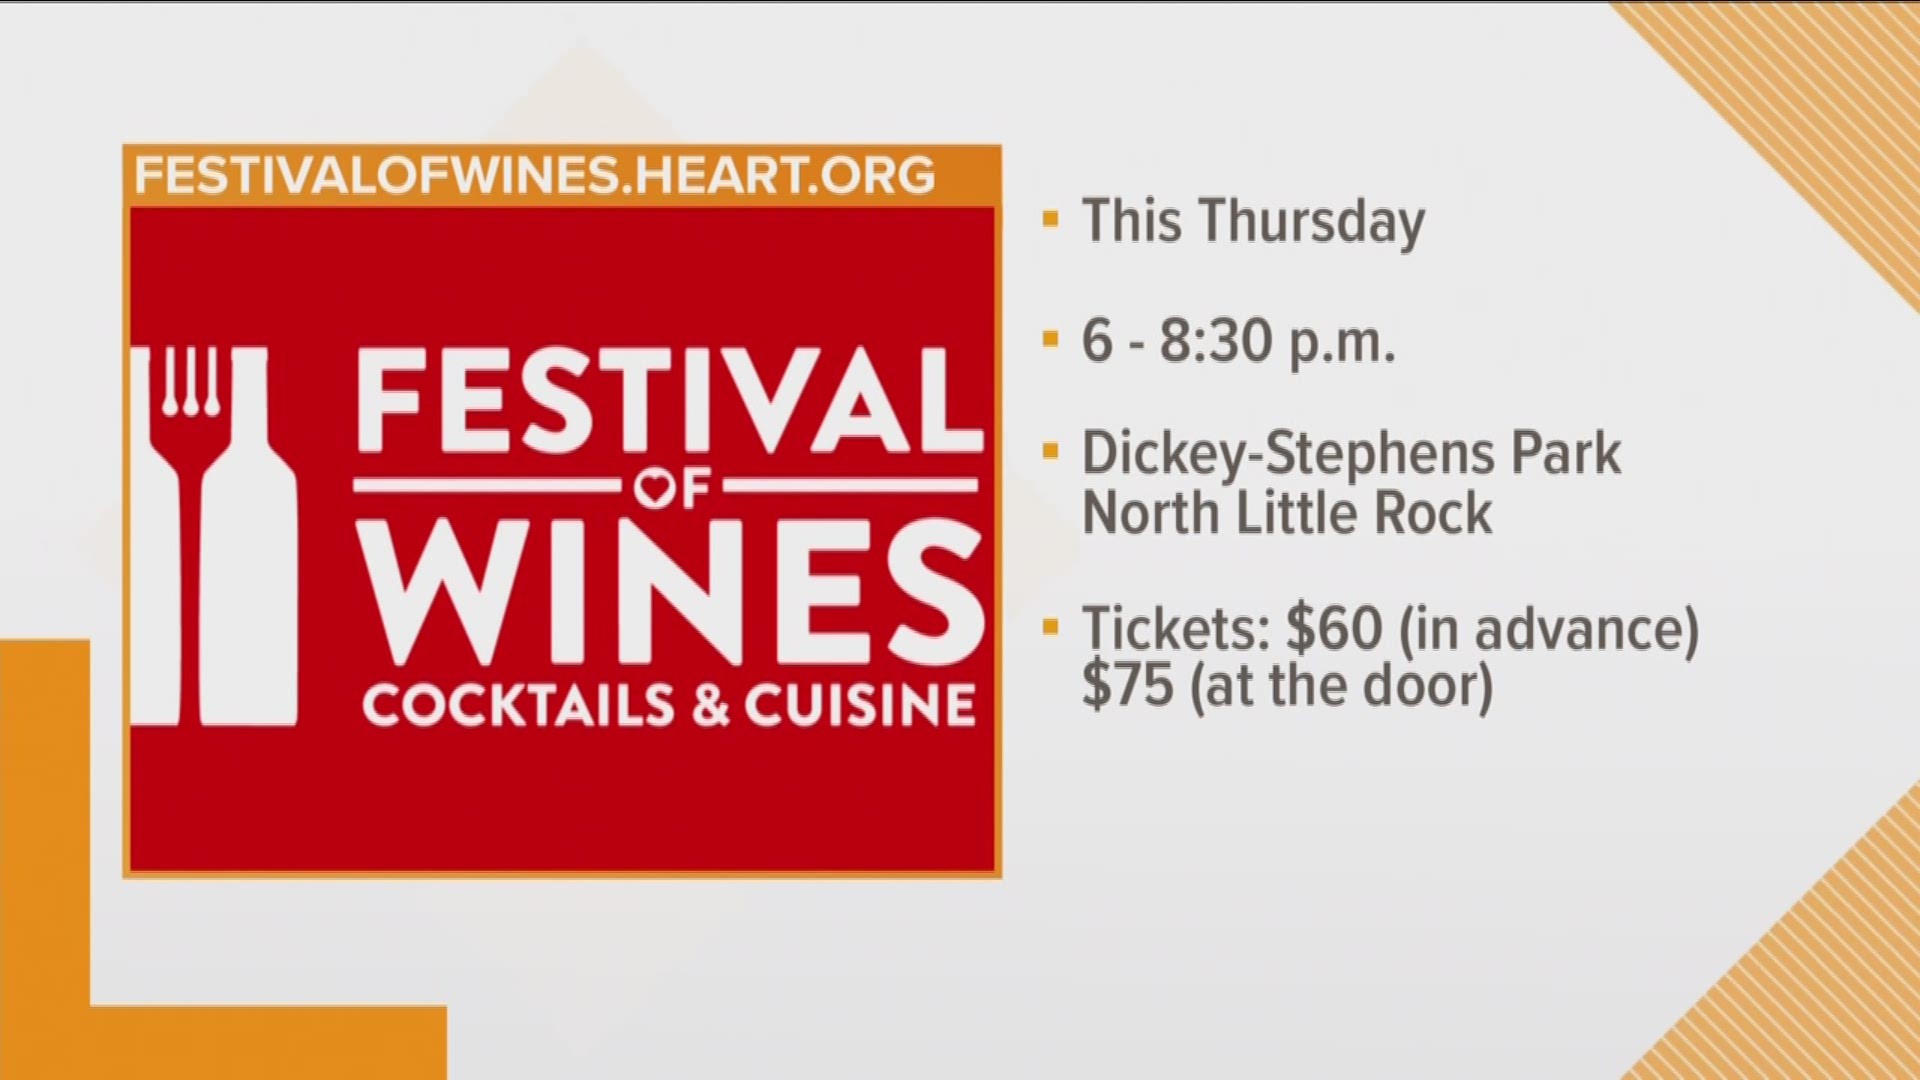 The largest wine festival in central Arkansas features foods from over 17 local restaurants with samplings of hundreds of wines from around the world, plus silent and premier auctions.